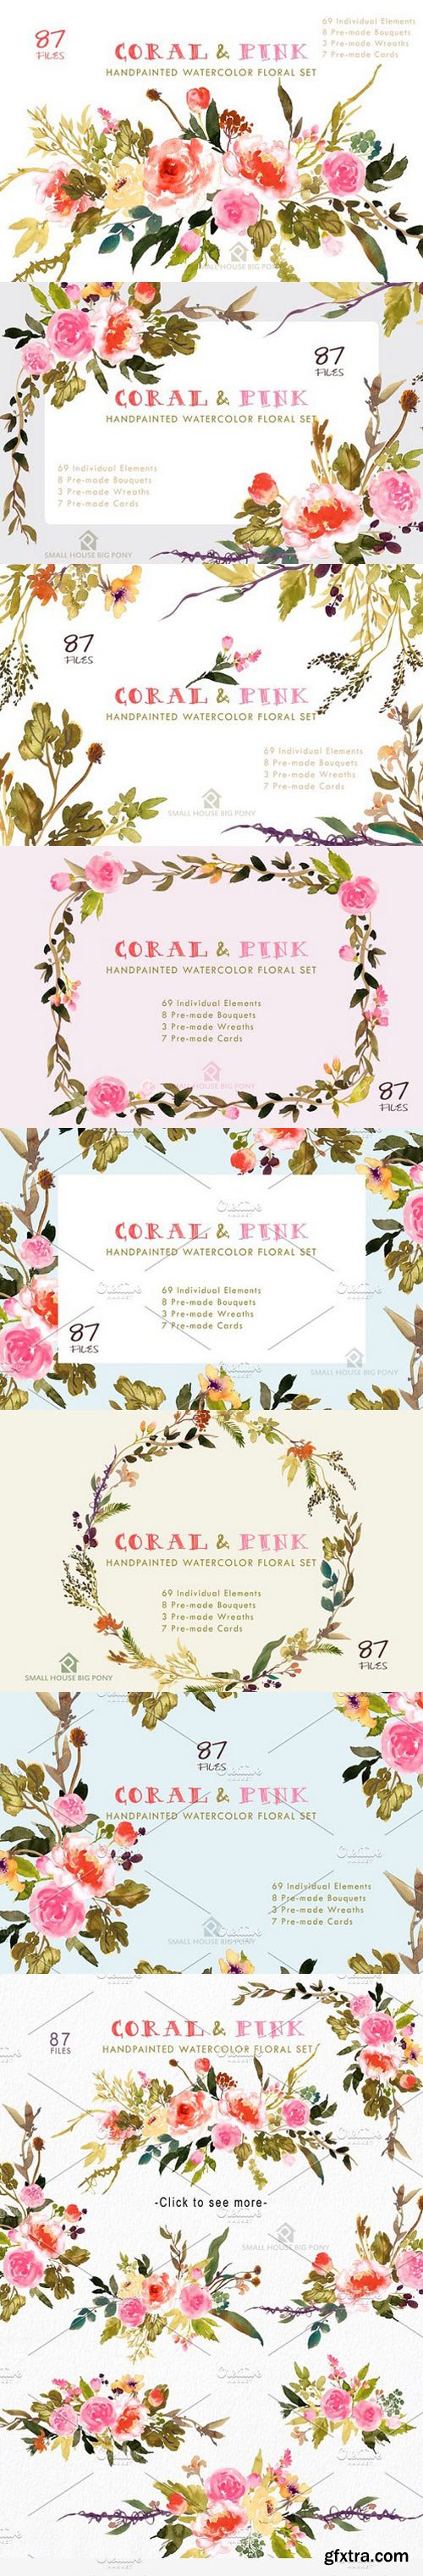 CM - Coral & Pink - Flower Collection 1354647